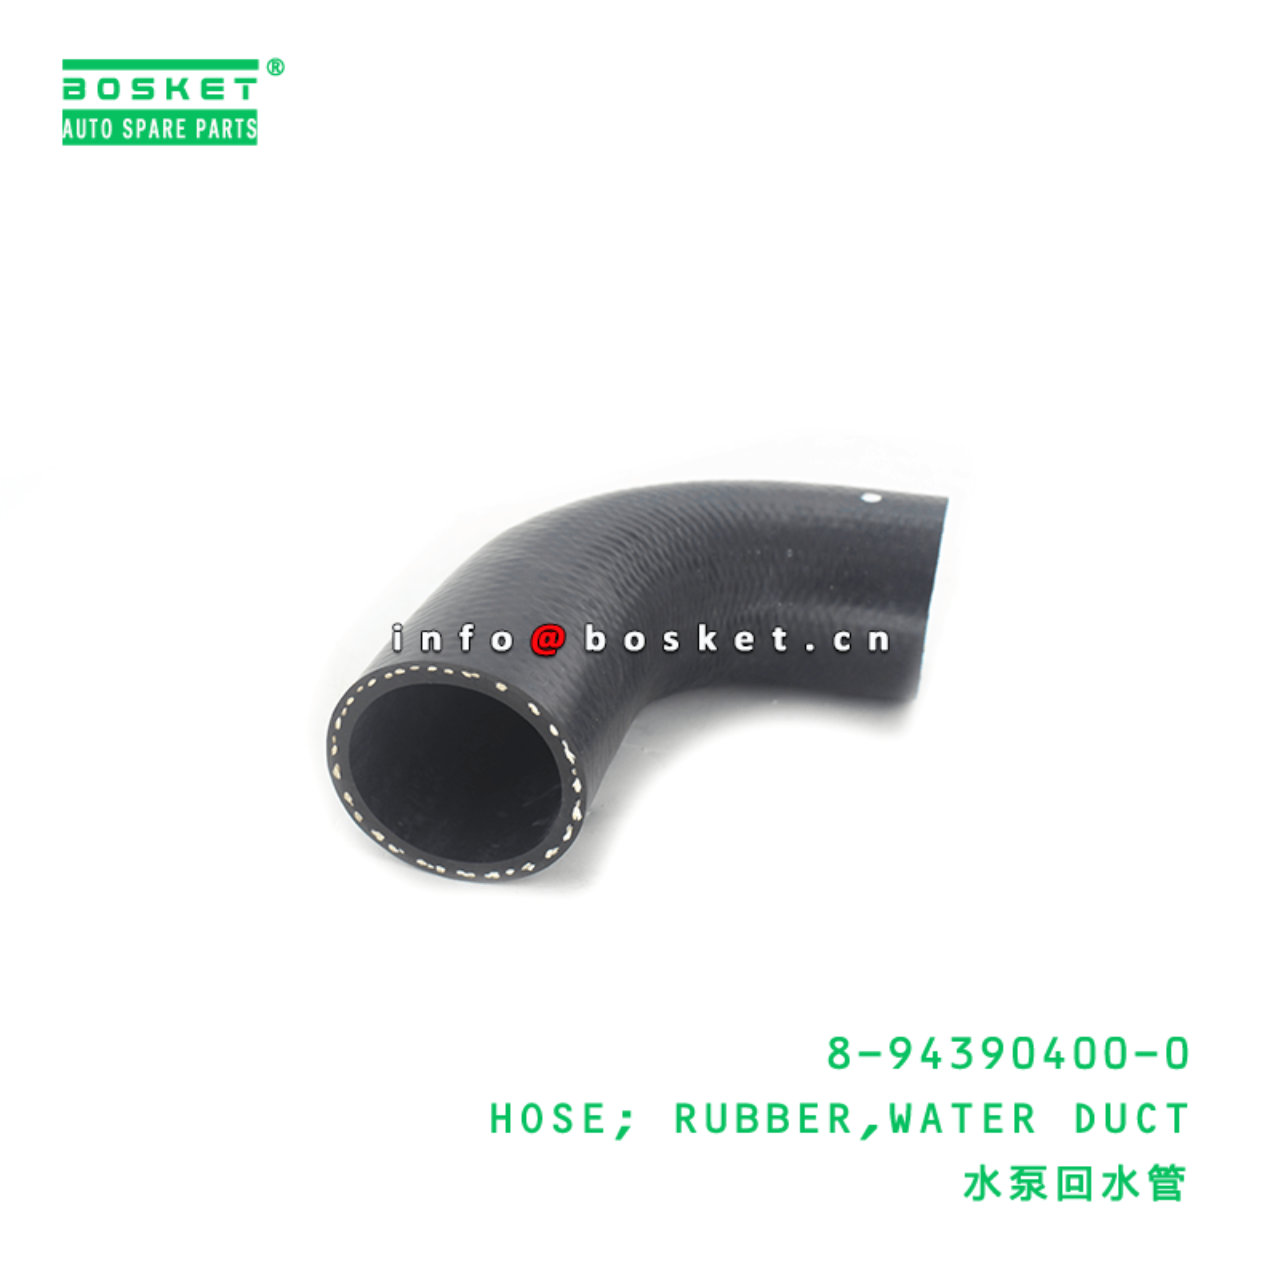 8-94390400-0 Water Duct Rubber Hose 8943904000 Suitable for ISUZU FRR33 6HH1 